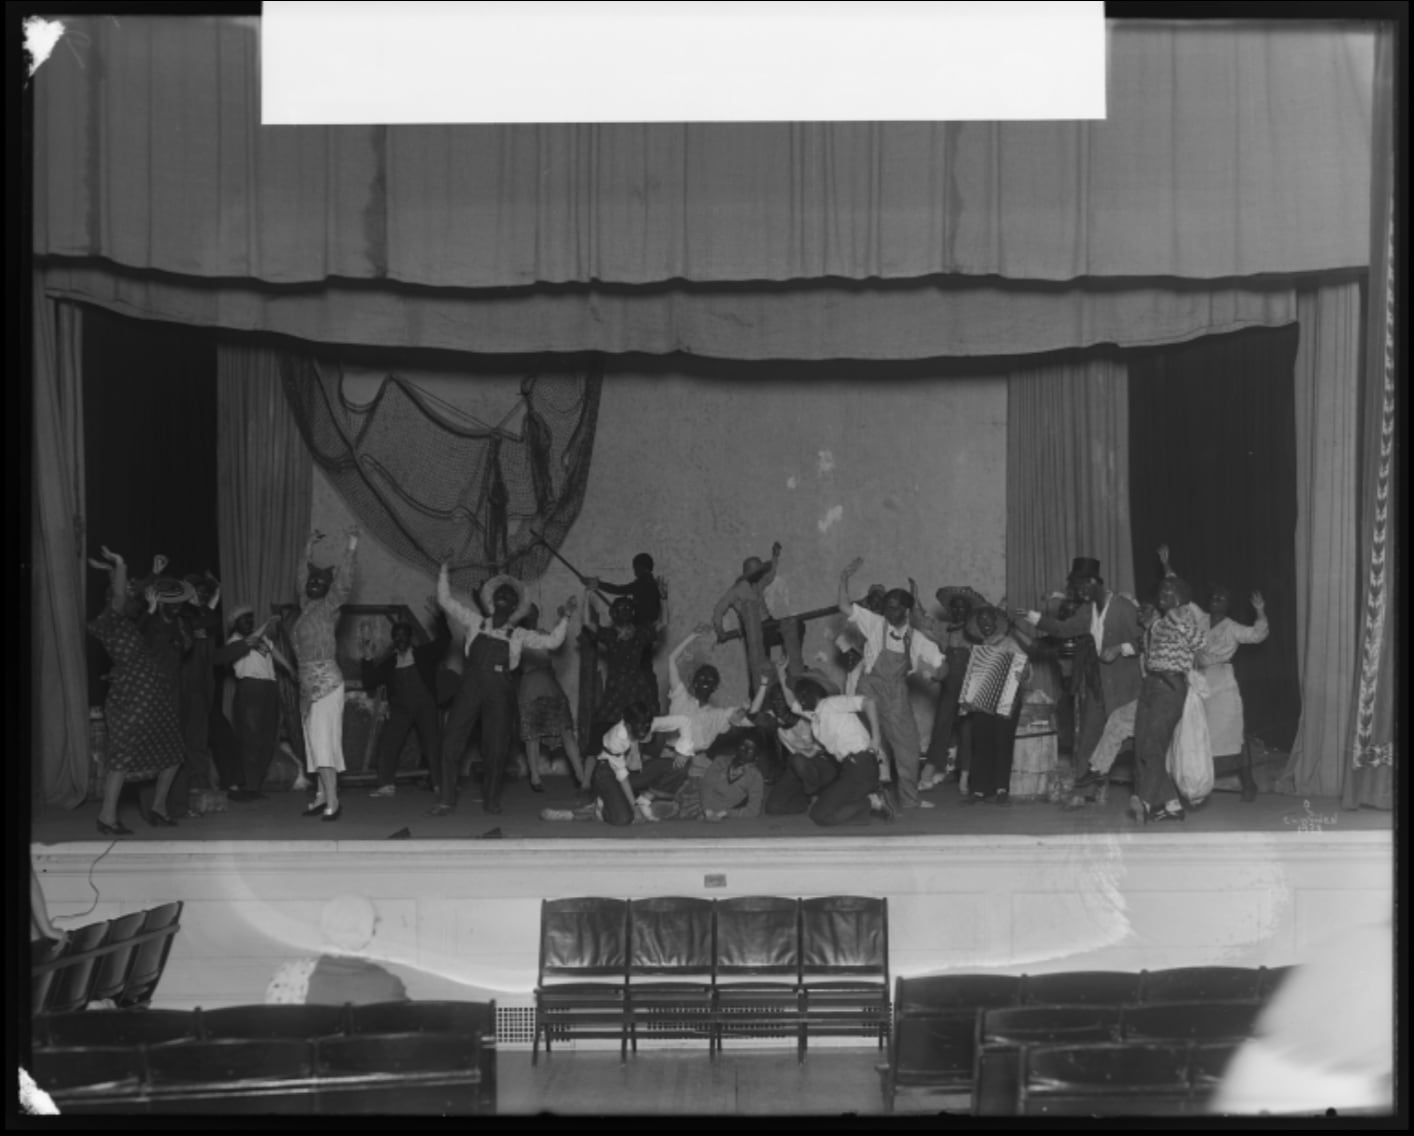 A black-and-white historical photo of Vassar students in racist blackface costumes, performing on stage in an indoor theater.